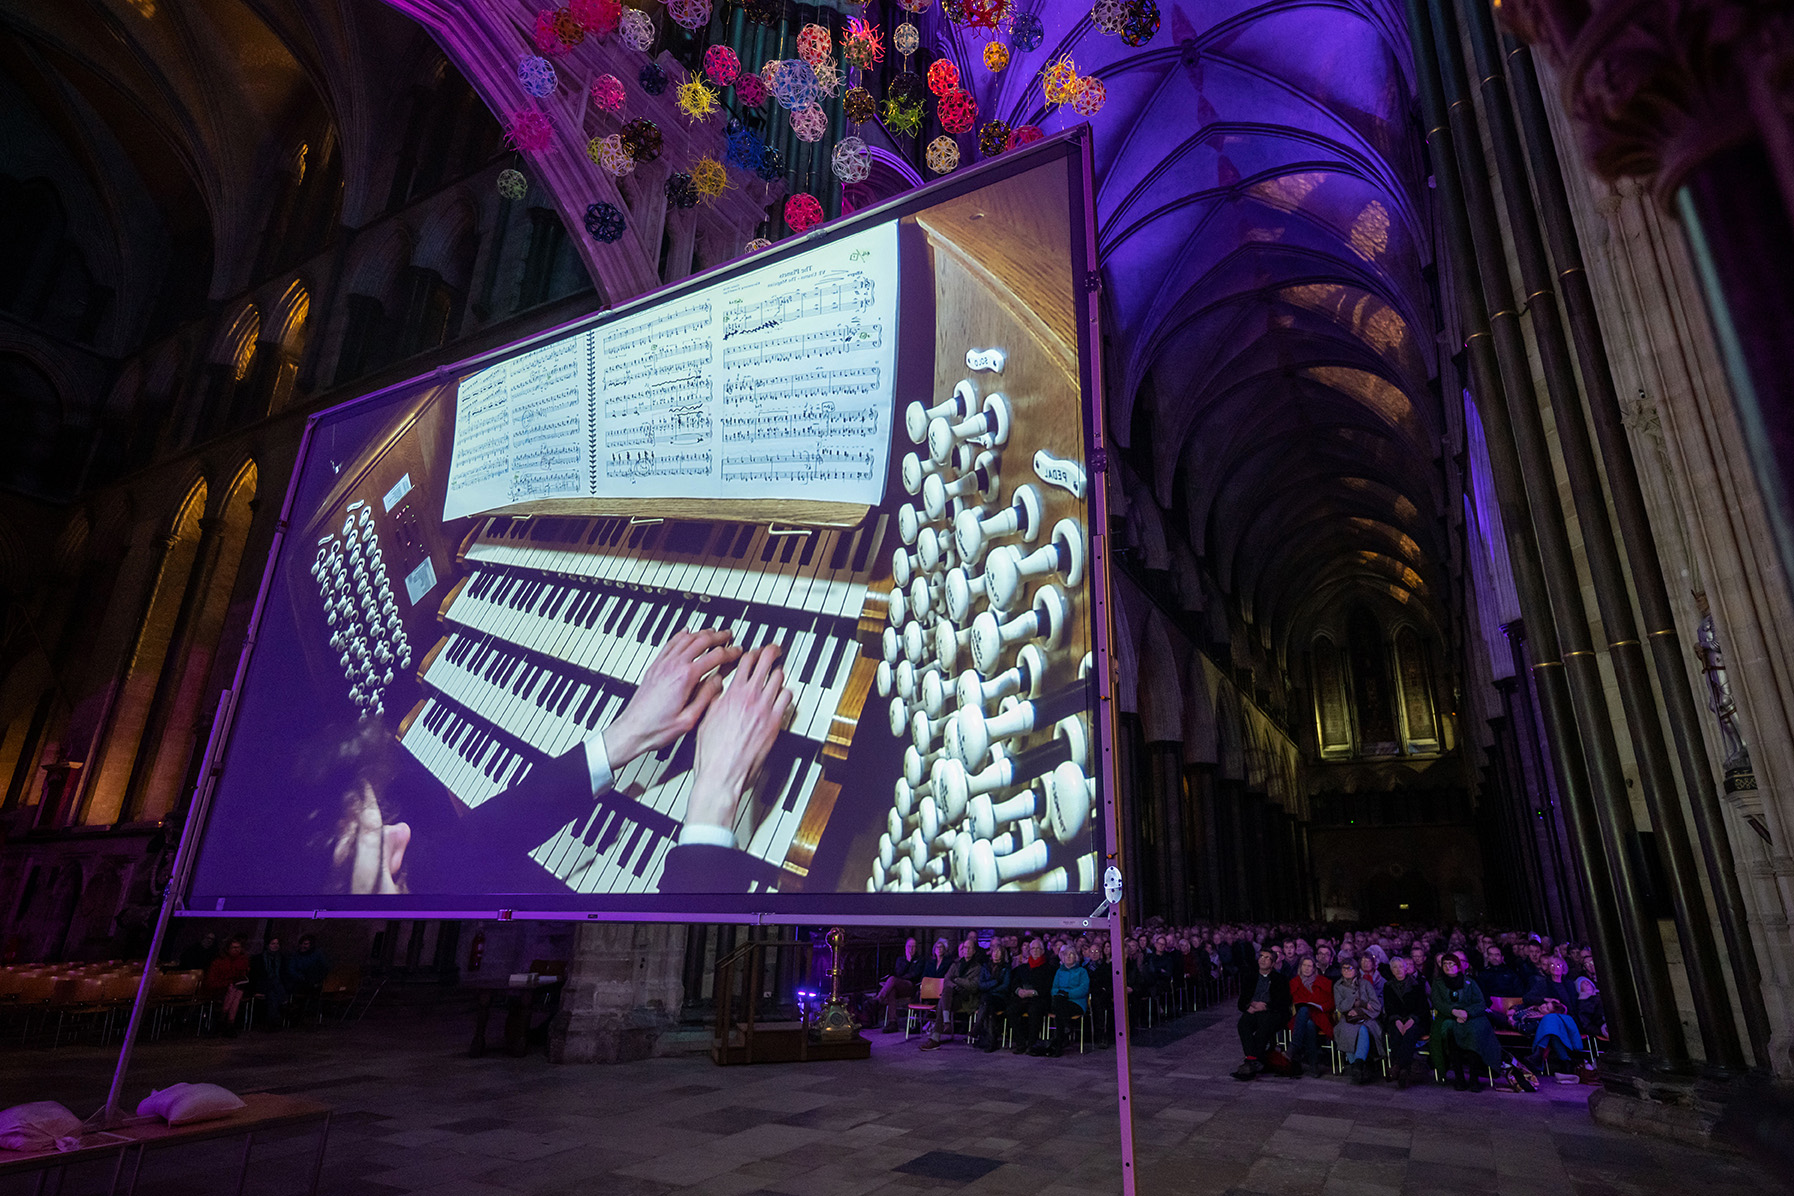 Person playing the organ projected on a screen in front of a large audience